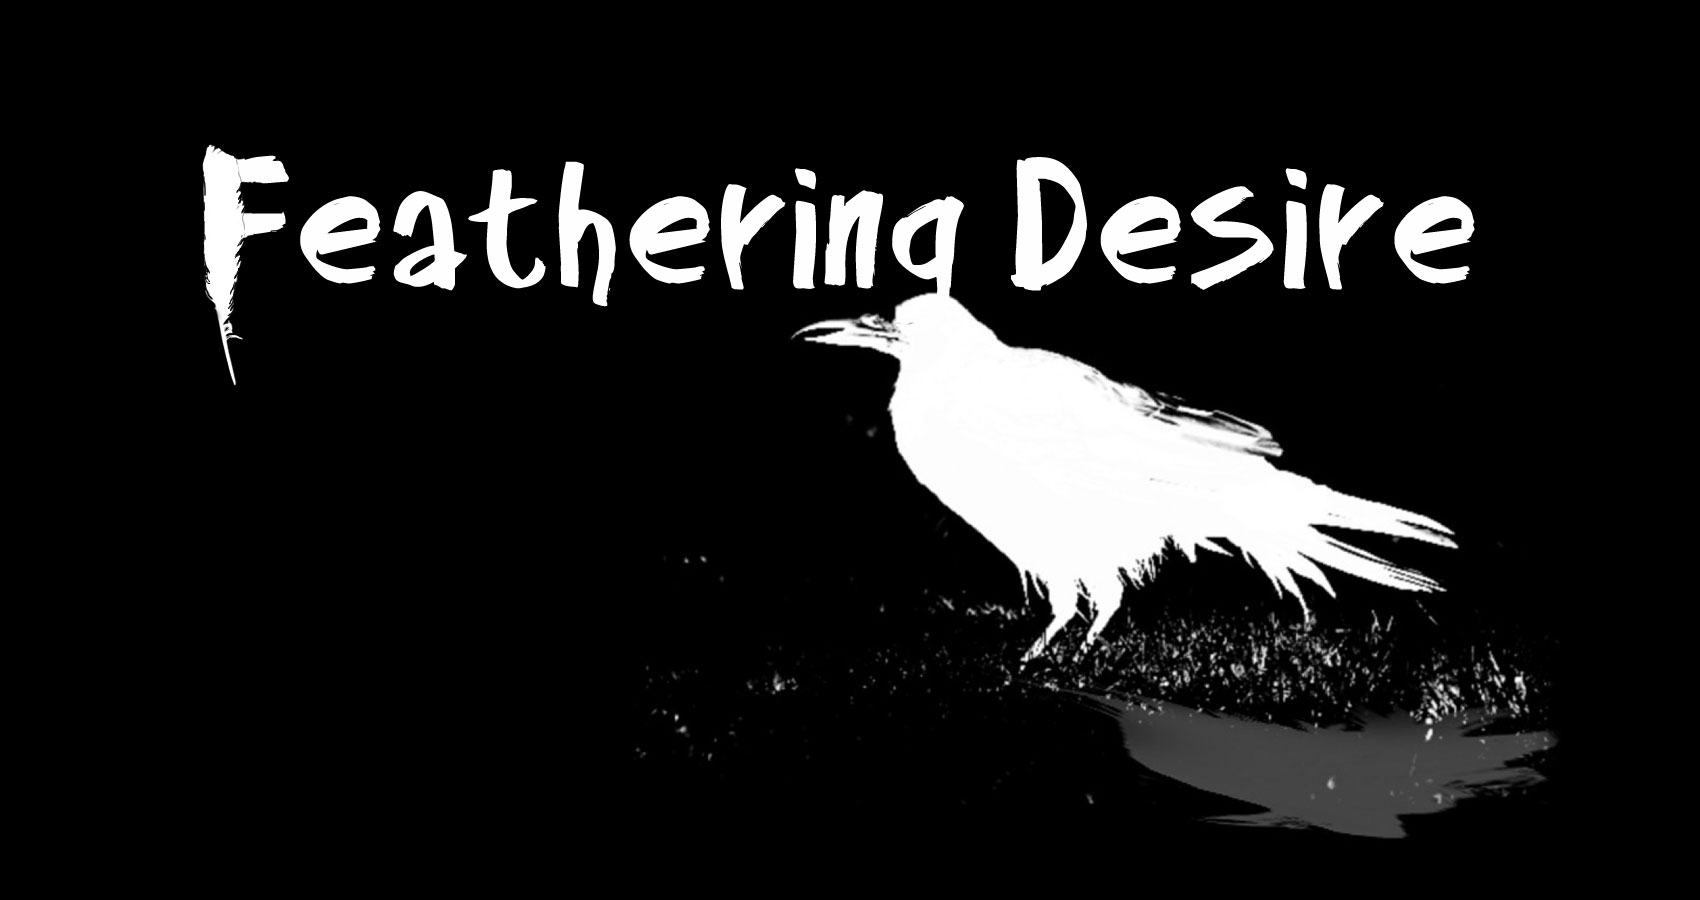 Feathering Desire by Lyle Hutchhinson at Spillwords.com